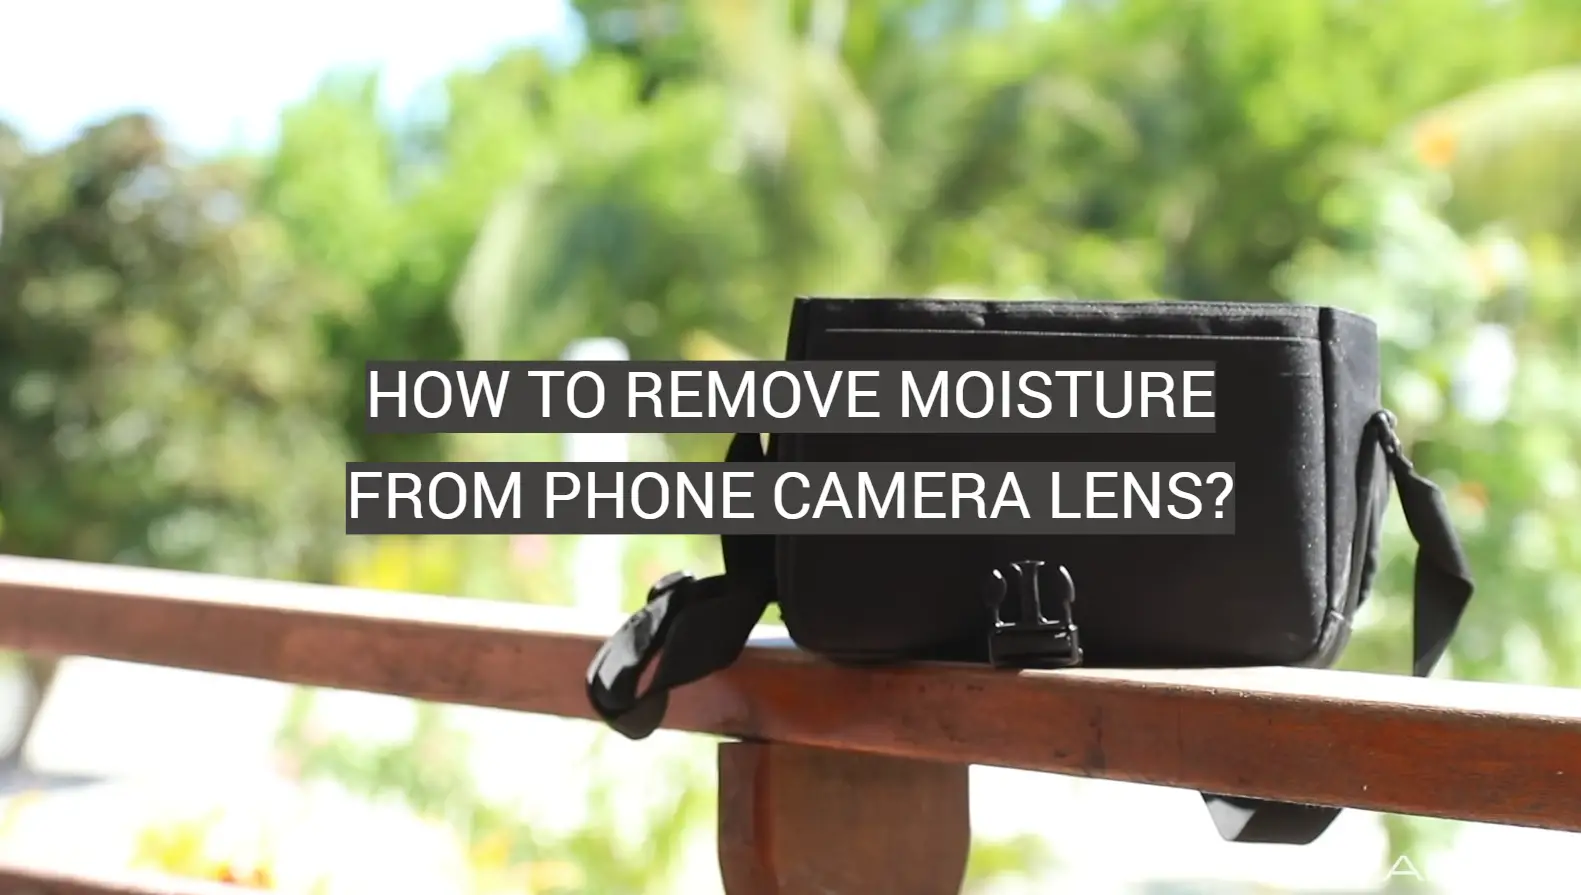 How to Remove Moisture From Phone Camera Lens?